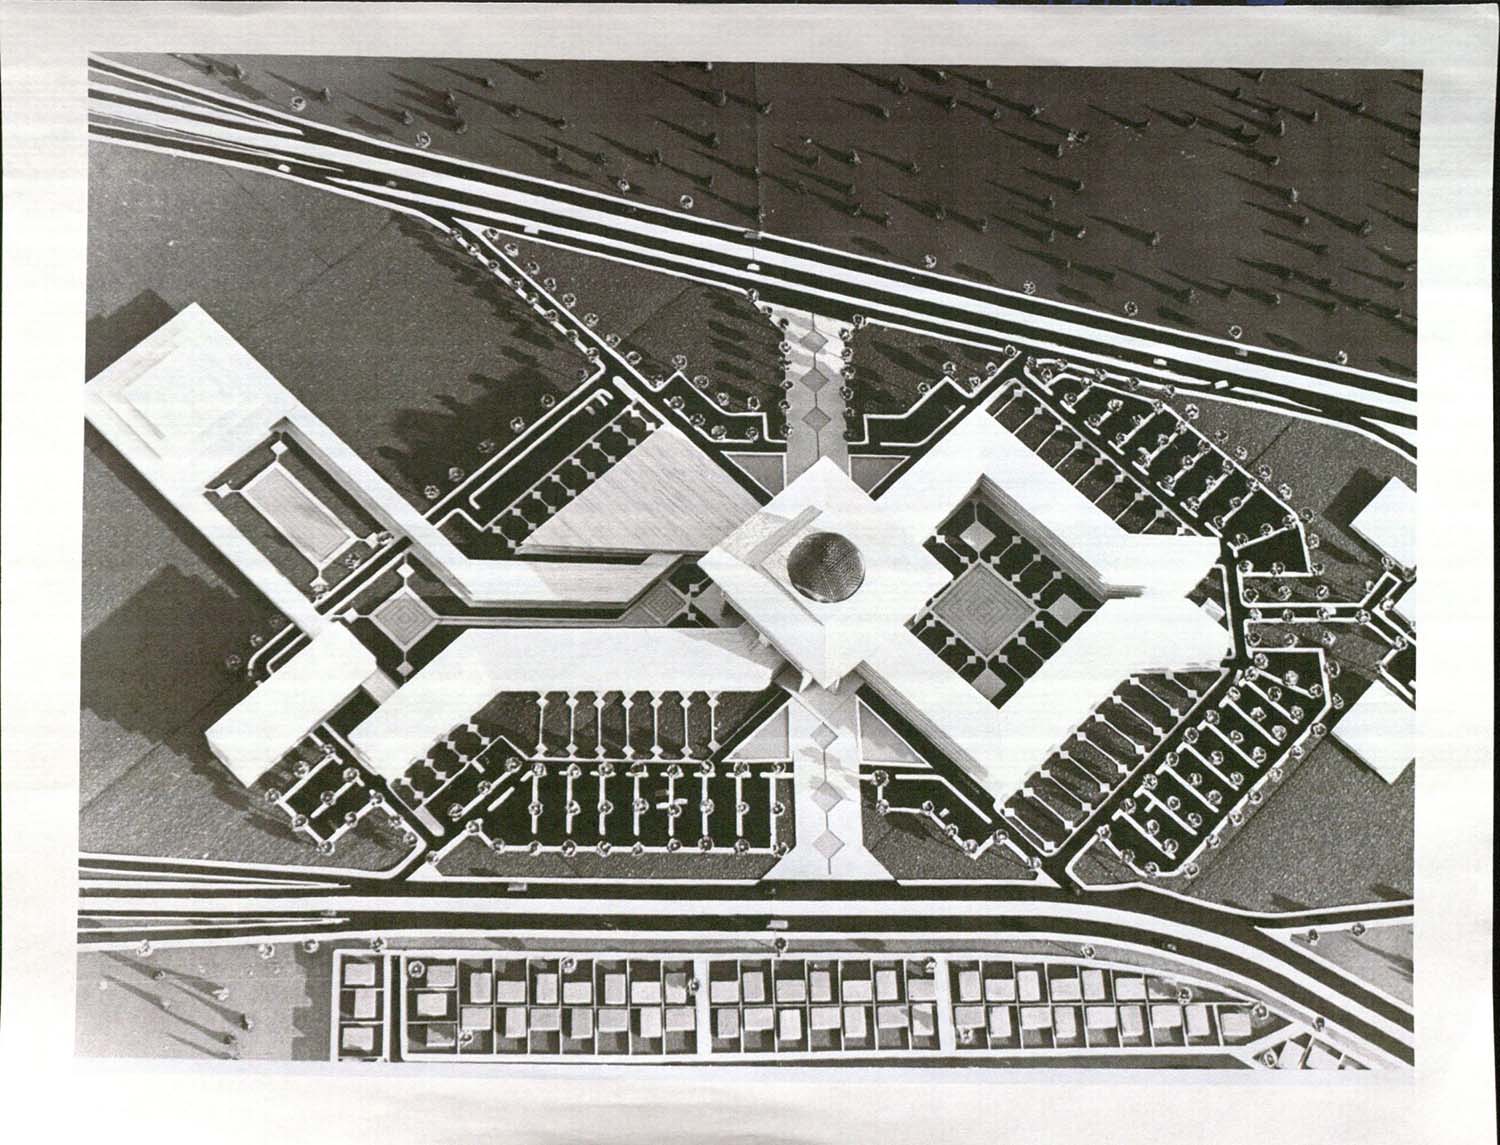 High Council of Agriculture Compound - View of the Complex model created for the development of the High Council Agricultural Compound.